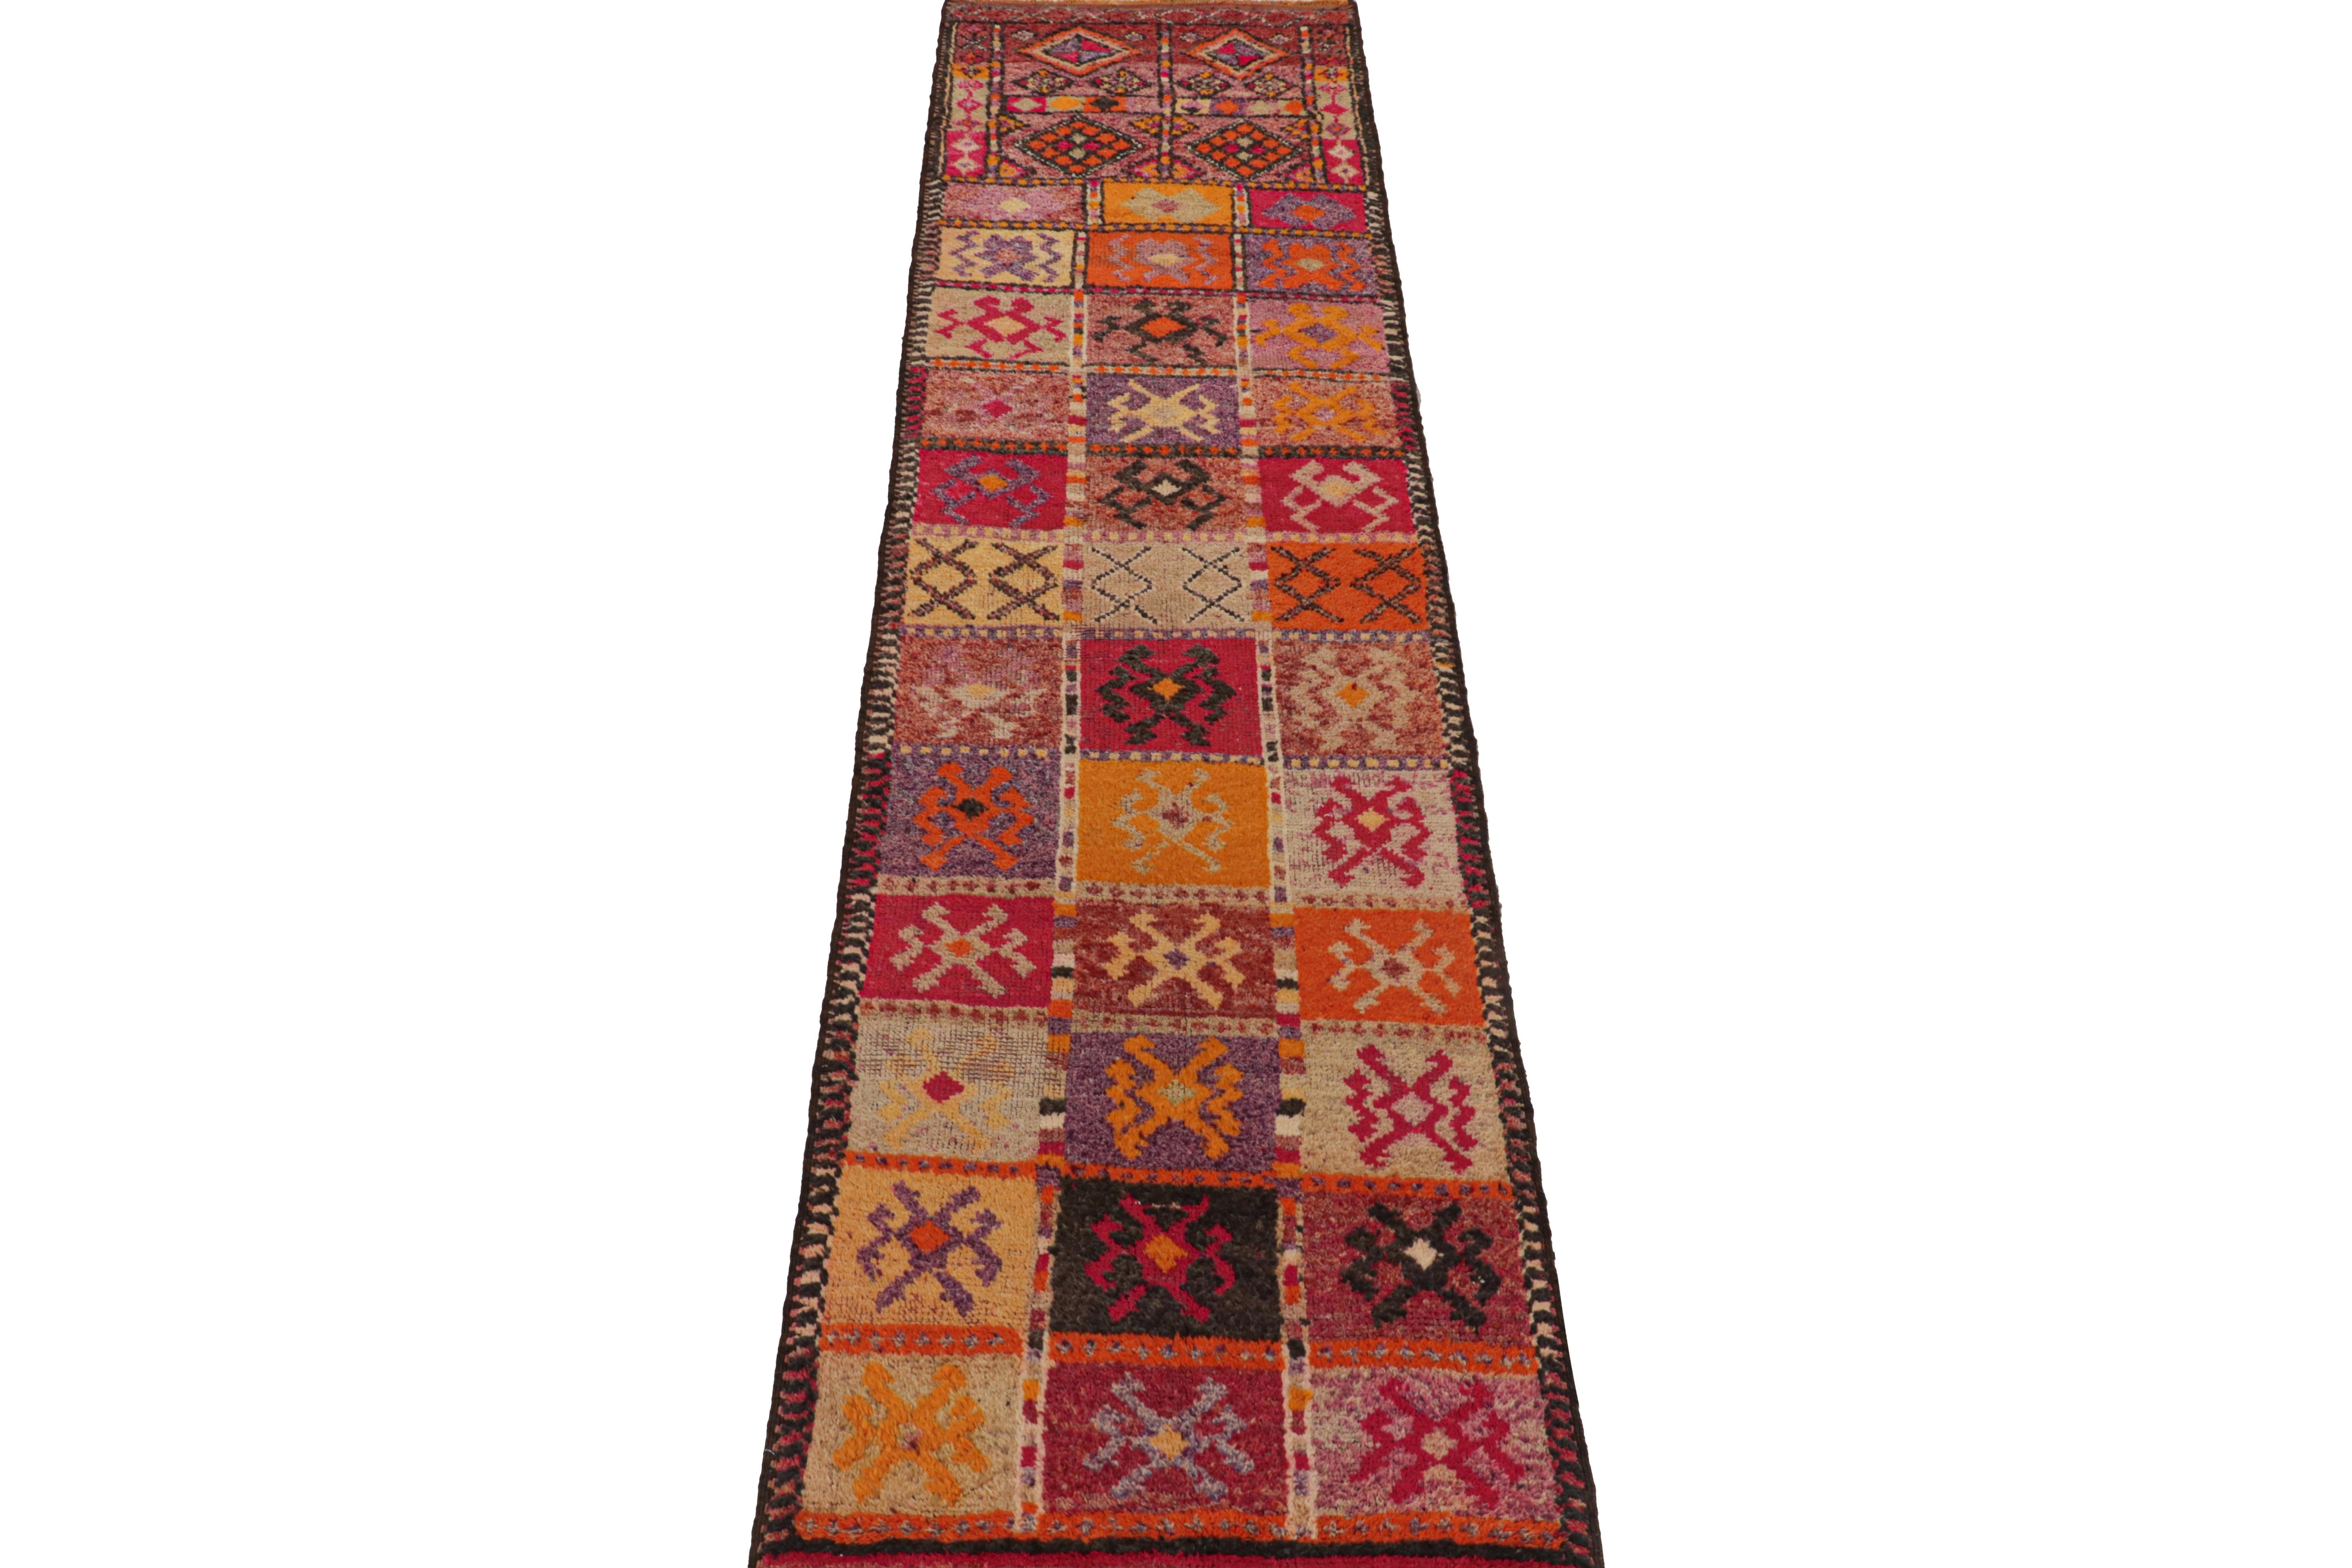 This vintage 3x12 tribal runner is an exciting new entry in Rug & Kilim's esteemed Antique & Vintage collection. hand knotted in wool, it originates from Turkey circa 1950-1960. 

Design:

This runner enjoys a wide range of colors in an